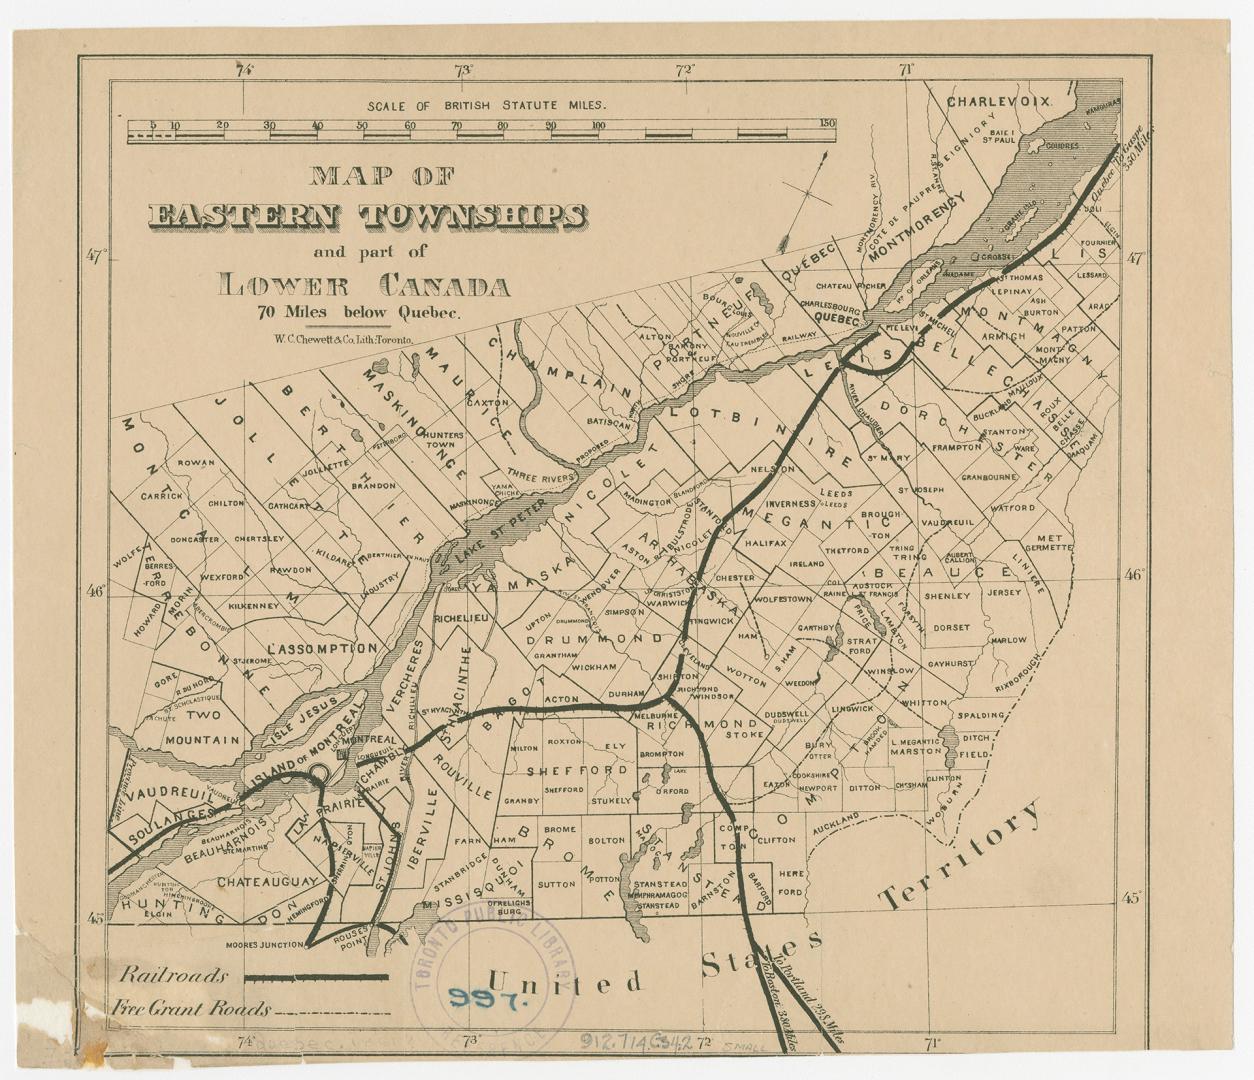 Map of Eastern Townships and part of Lower Canada 70 miles below Québec